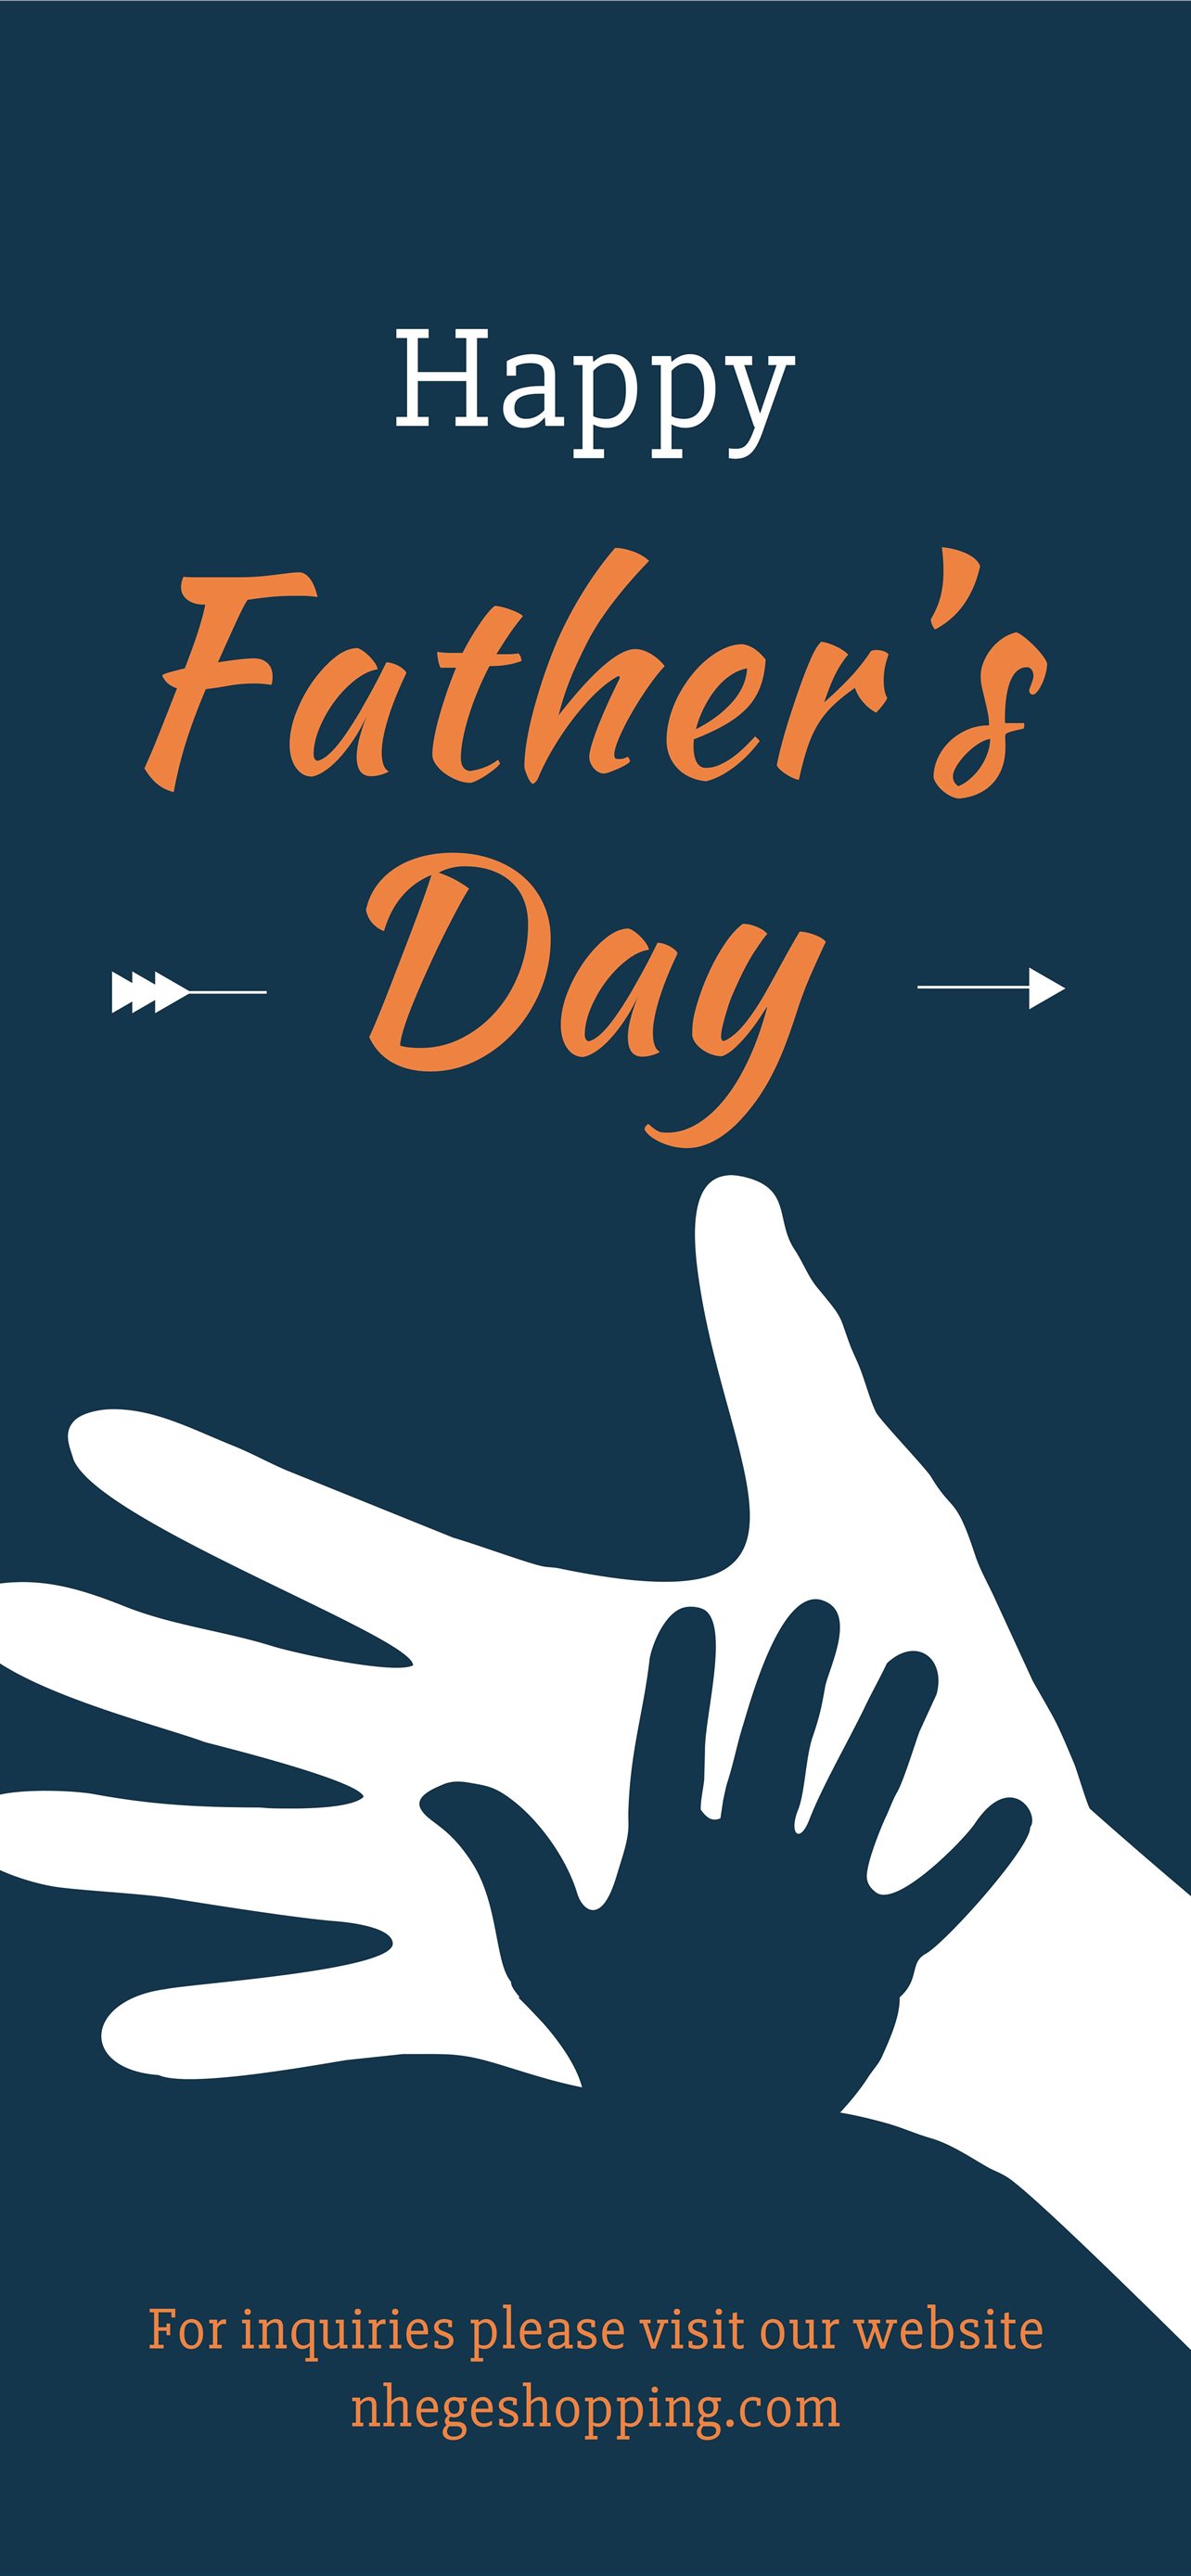 280 Happy Father's Day ideas in 2021 iPhone Wallpapers Free Download